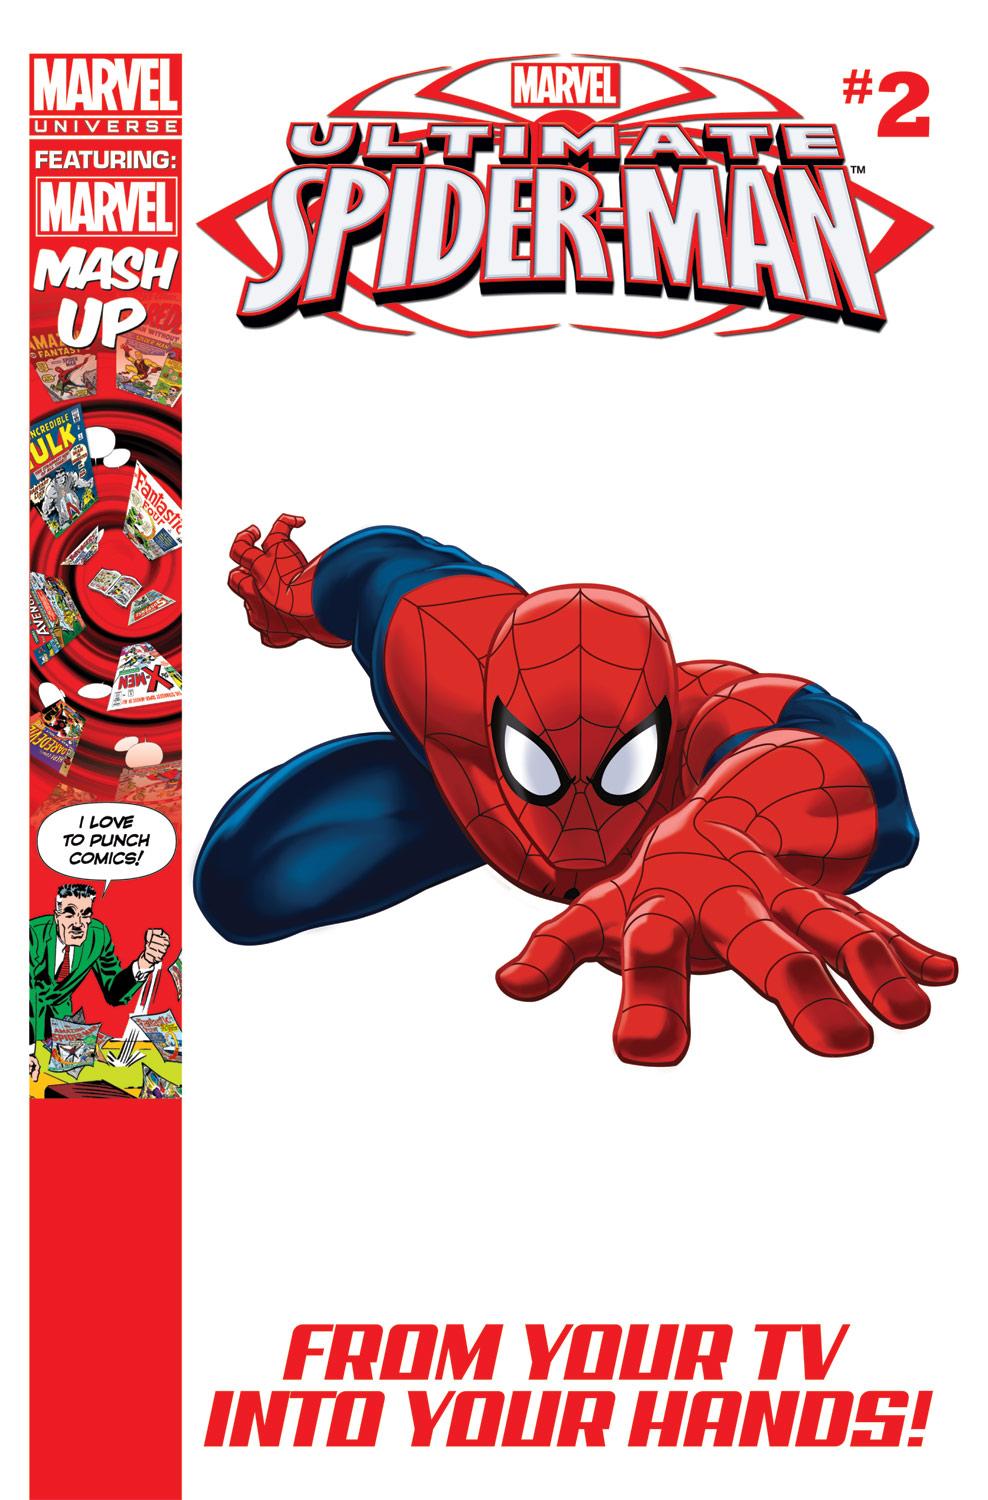 Marvel Universe Ultimate Spider-Man (2012) #2 | Comic Issues | Marvel